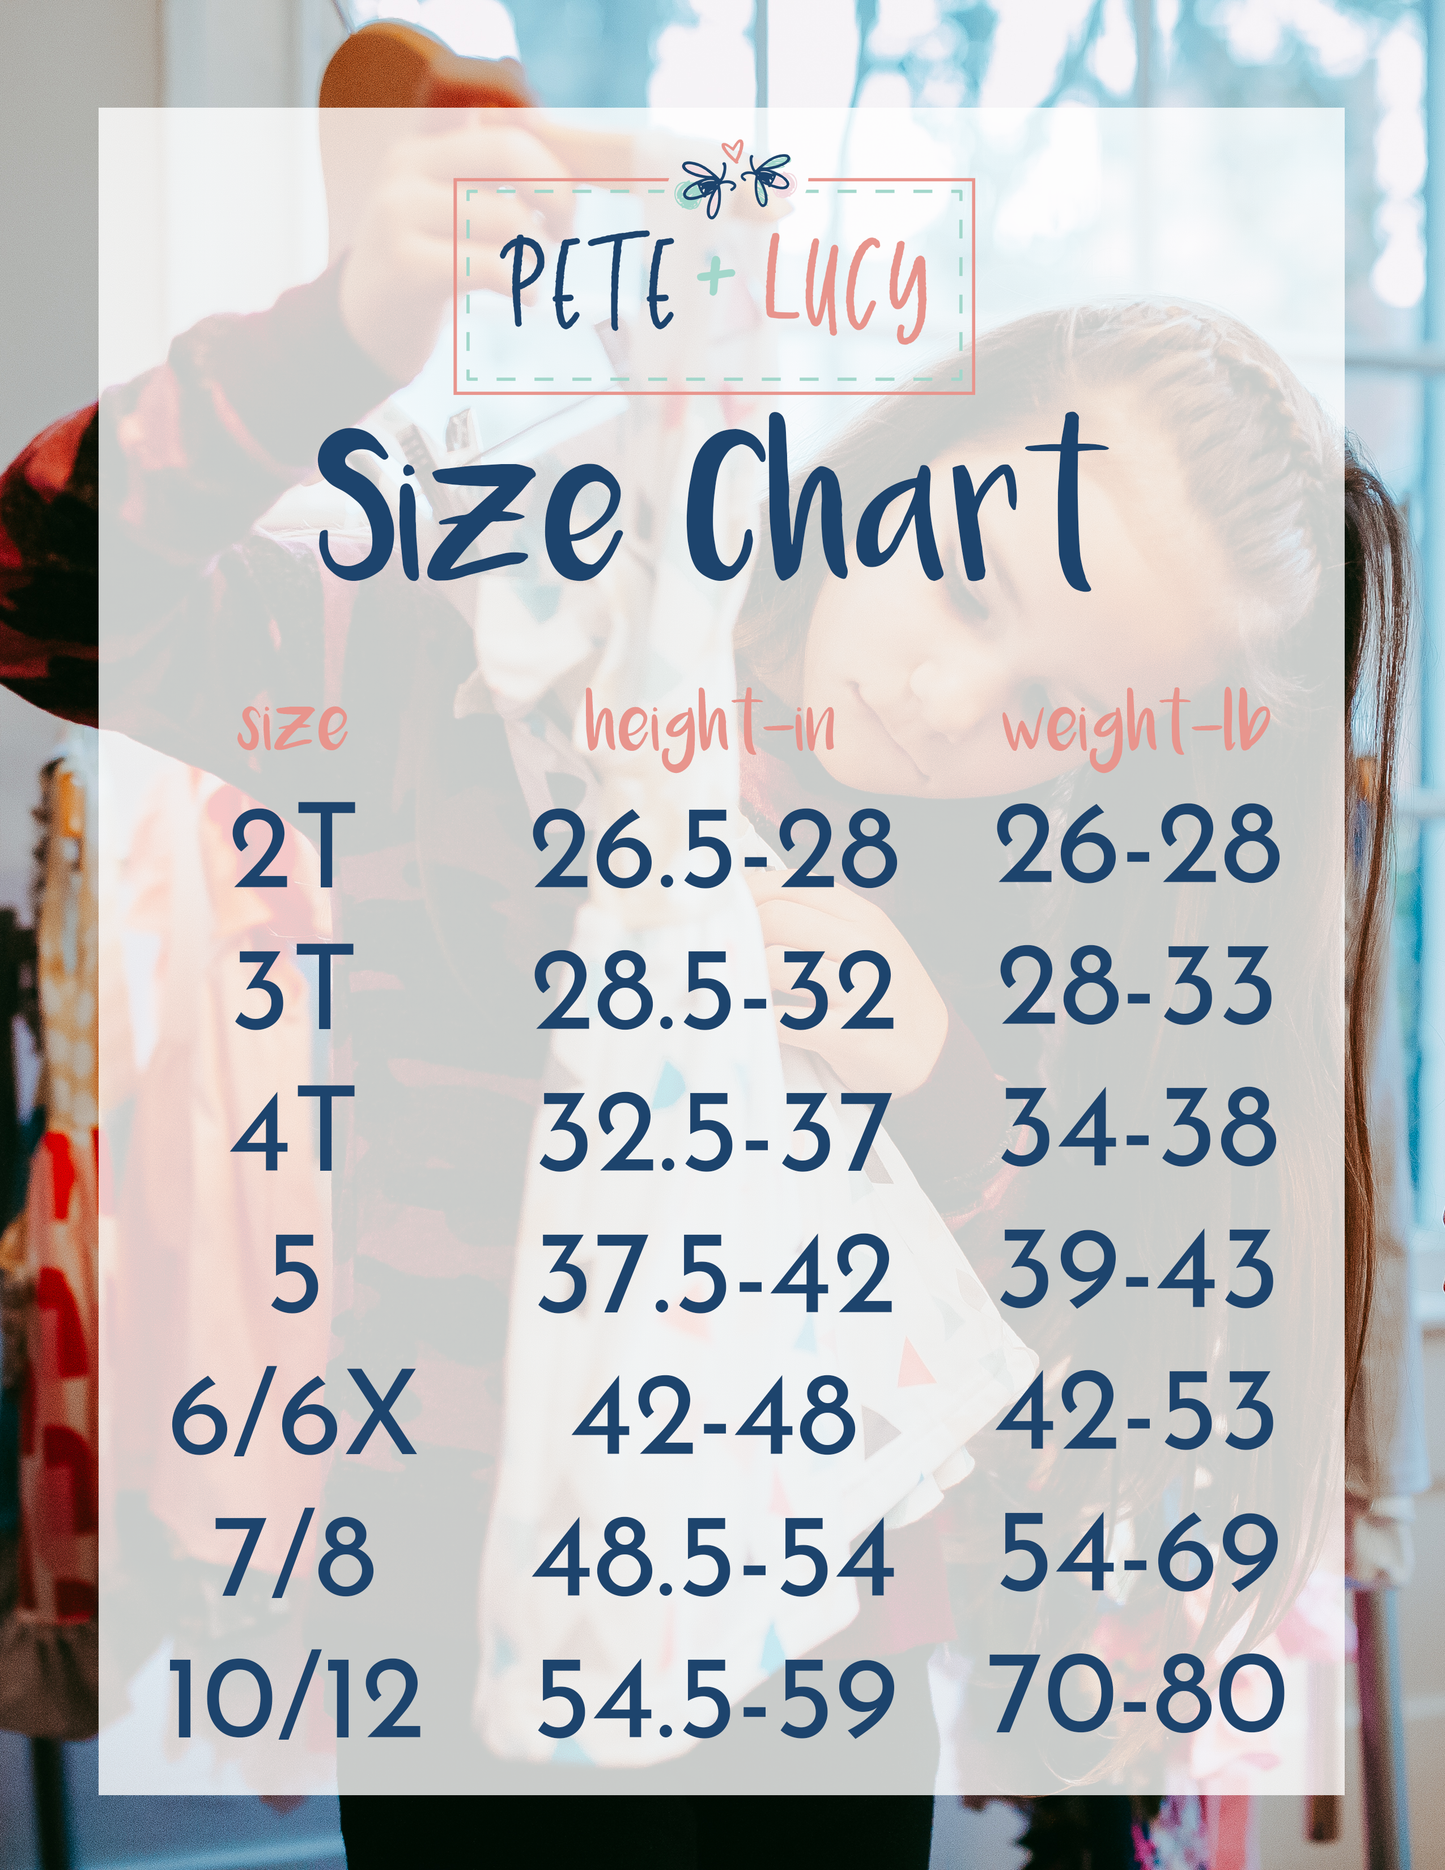 (Preorder) Dream Spell Short Set by Pete + Lucy